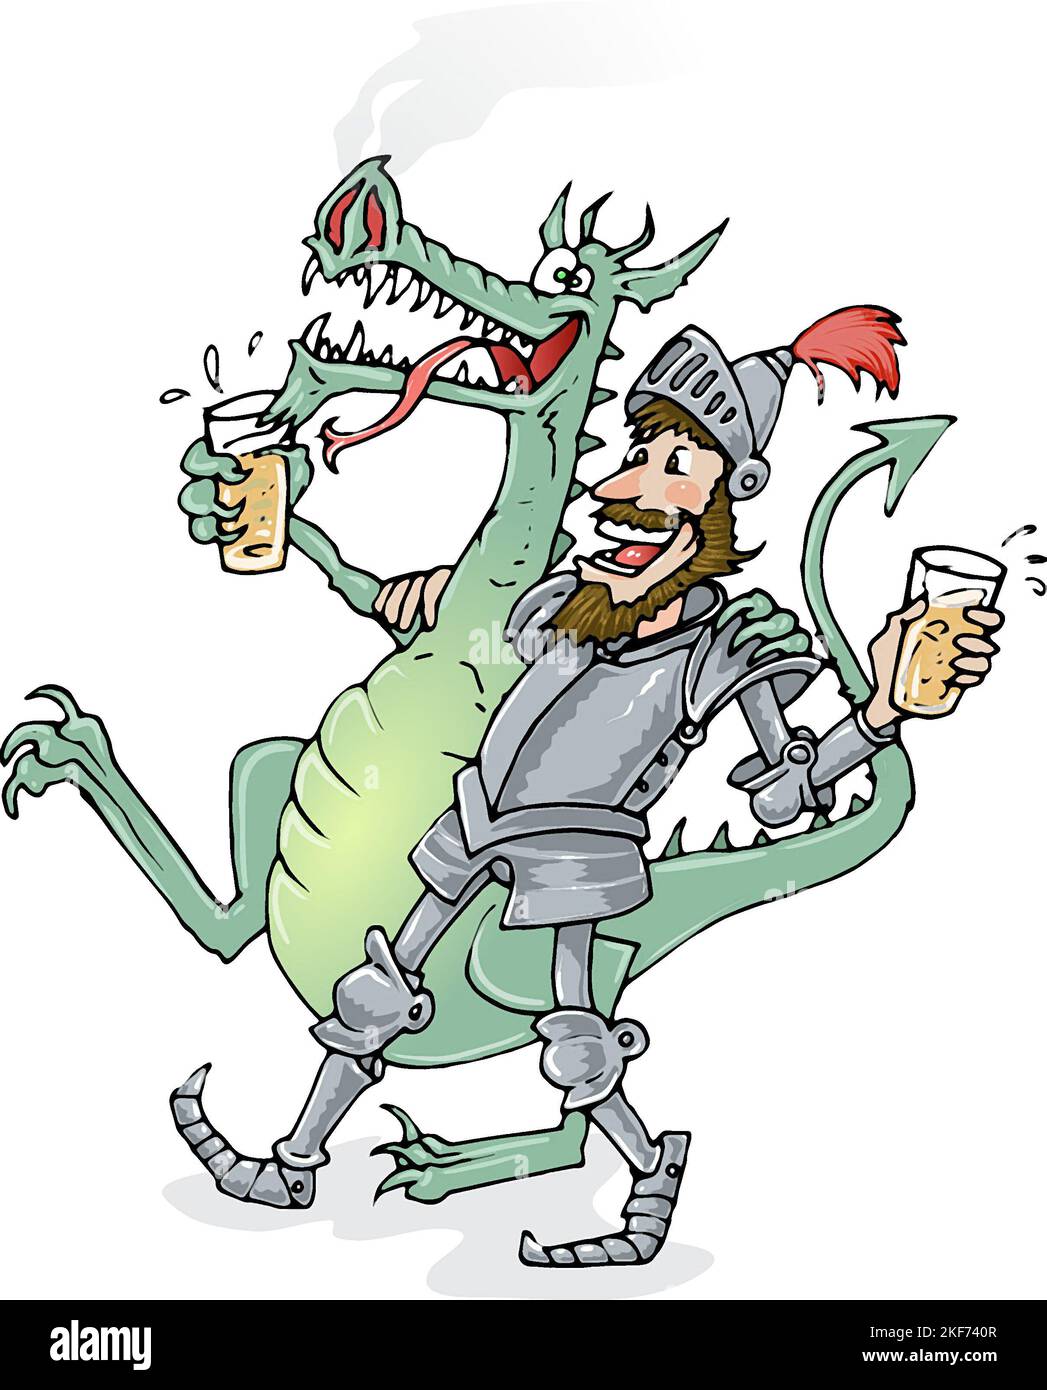 Funny humorous cartoon of knight in armour & dragon, arm in arm, enjoying a pint, alternative George & the Dragon, best friends, fantasy illustration Stock Photo